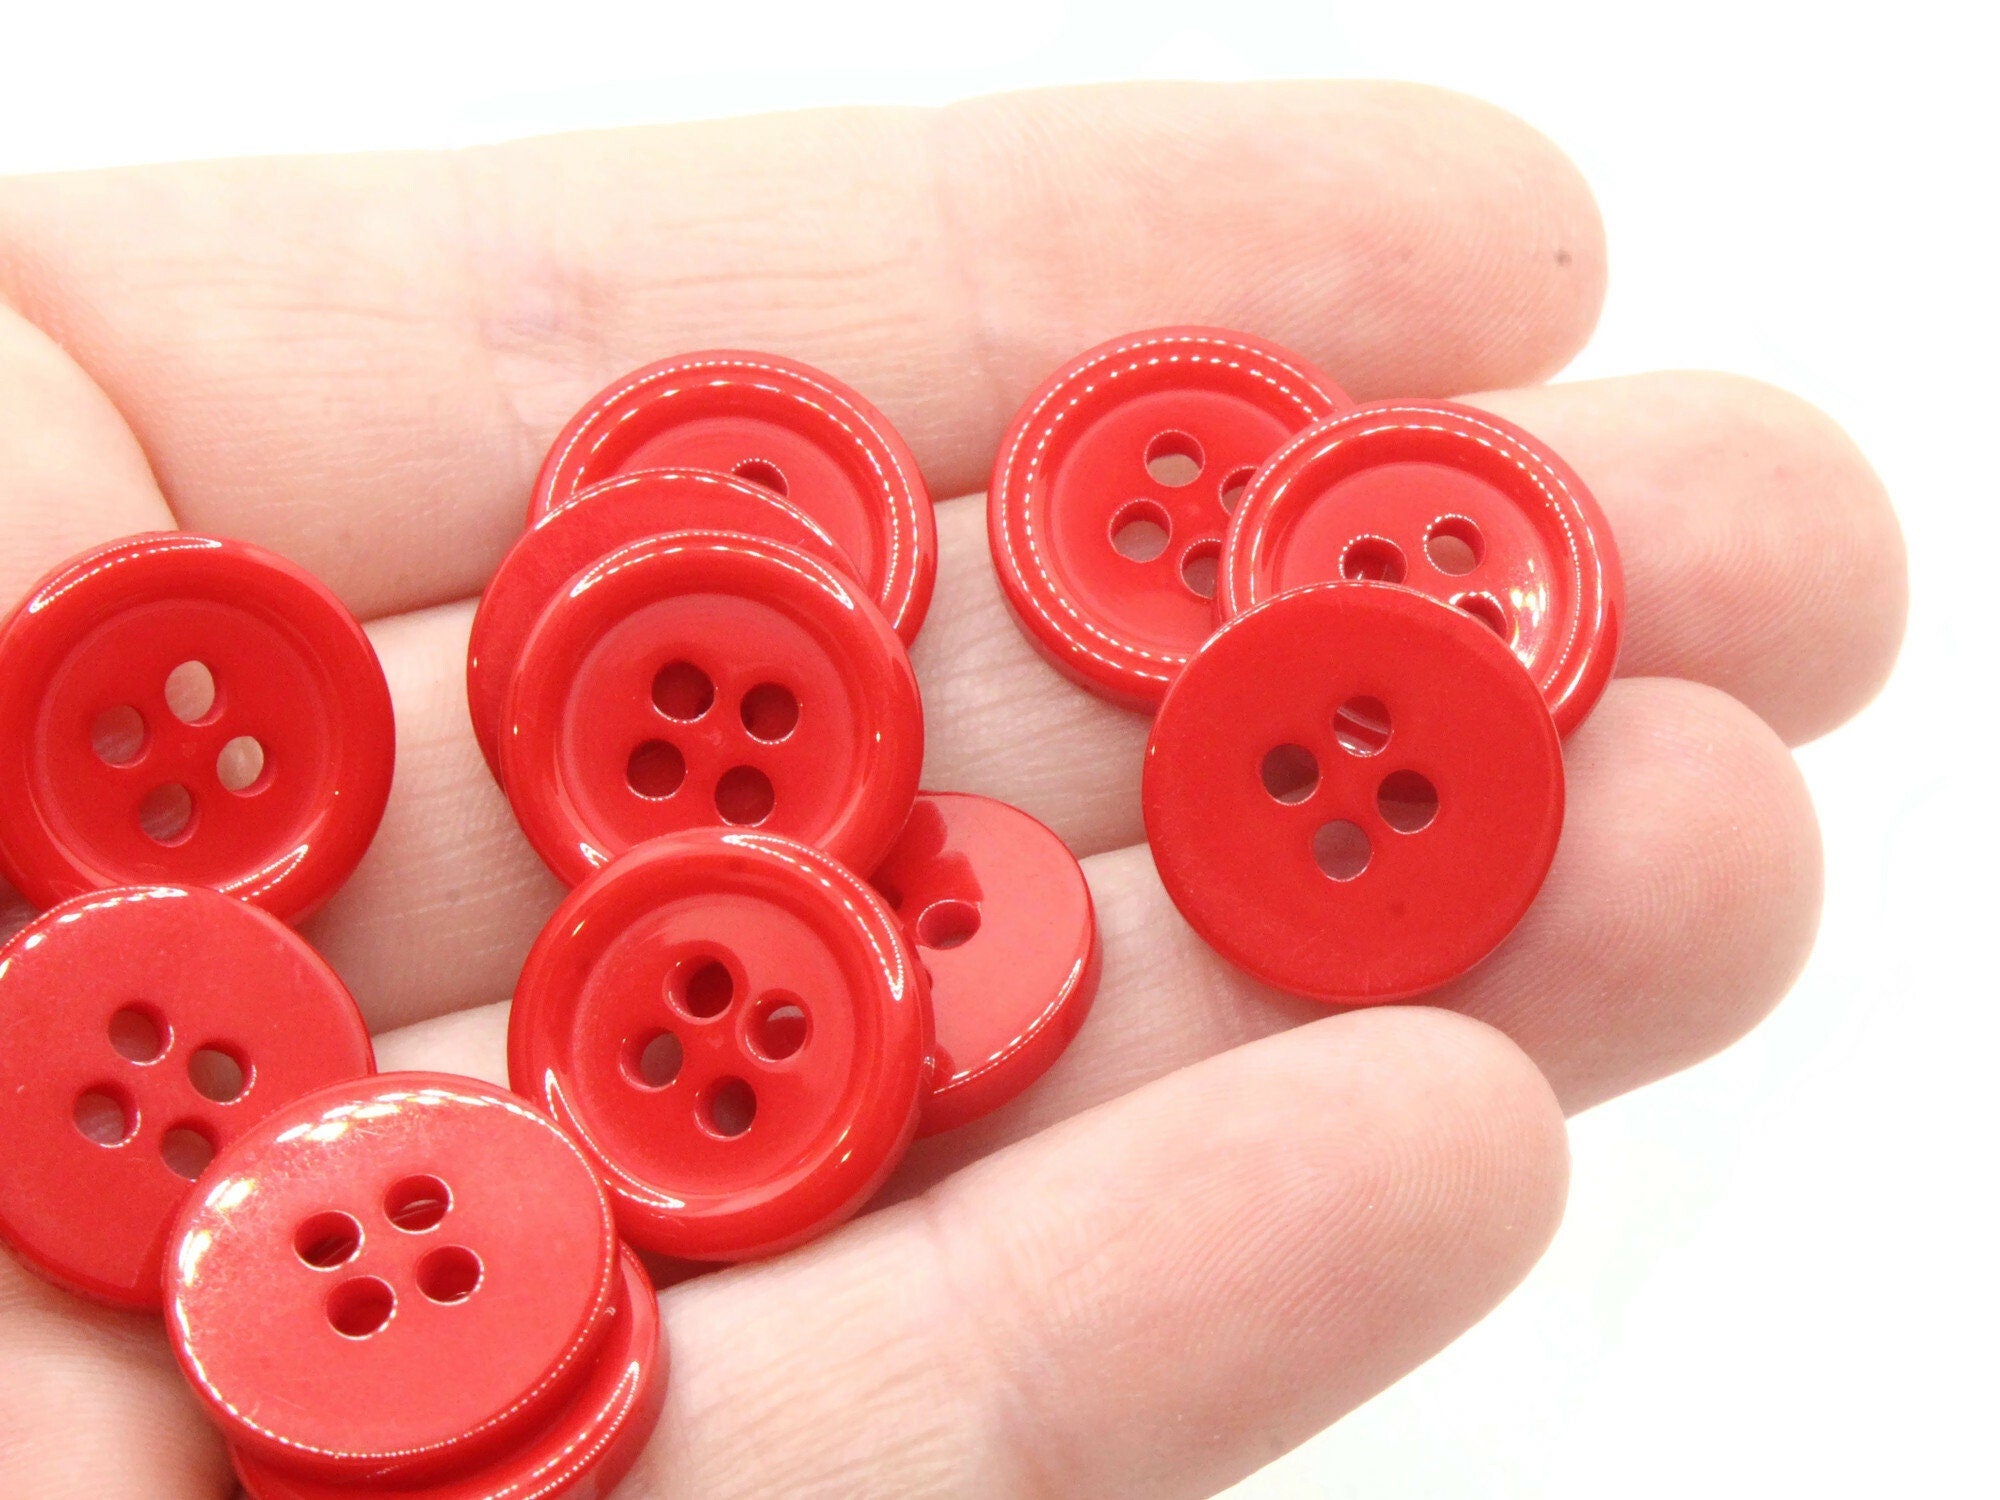 25 Red Plastic Buttons Small 10mm Round Buttons Kids Buttons 4